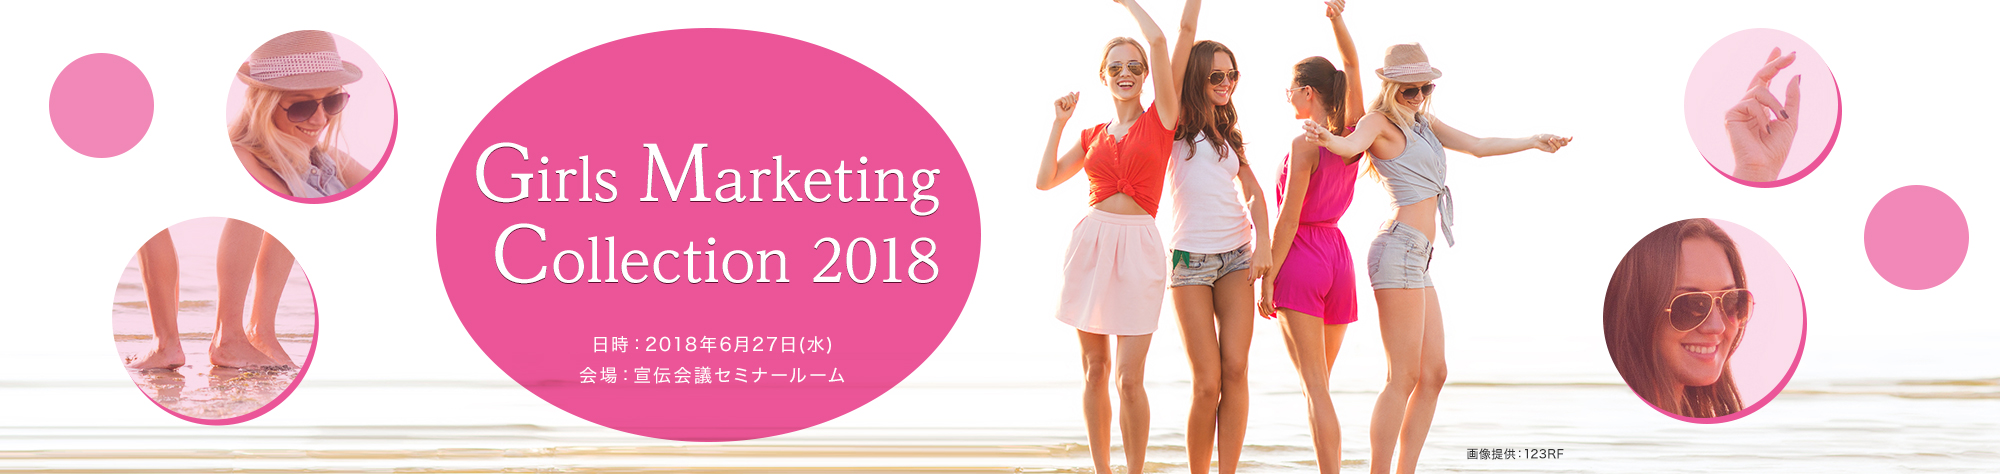 Girls Marketing Collection 2018